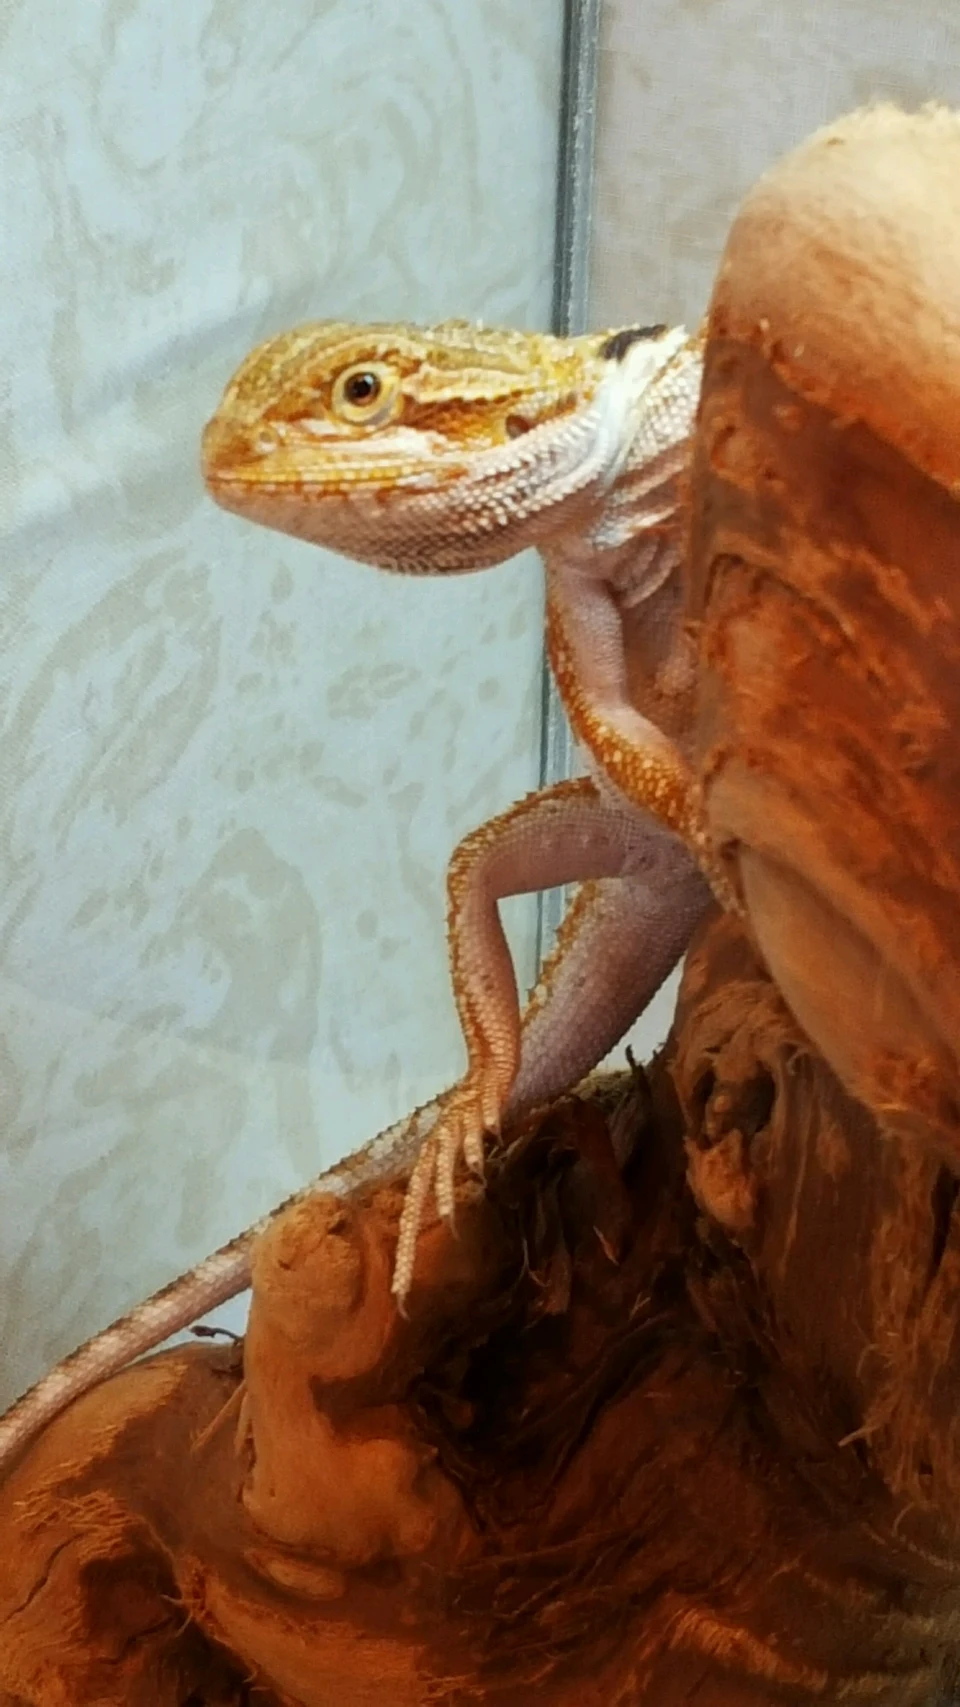 Neighbor's bearded dragon is hilarious when he poses